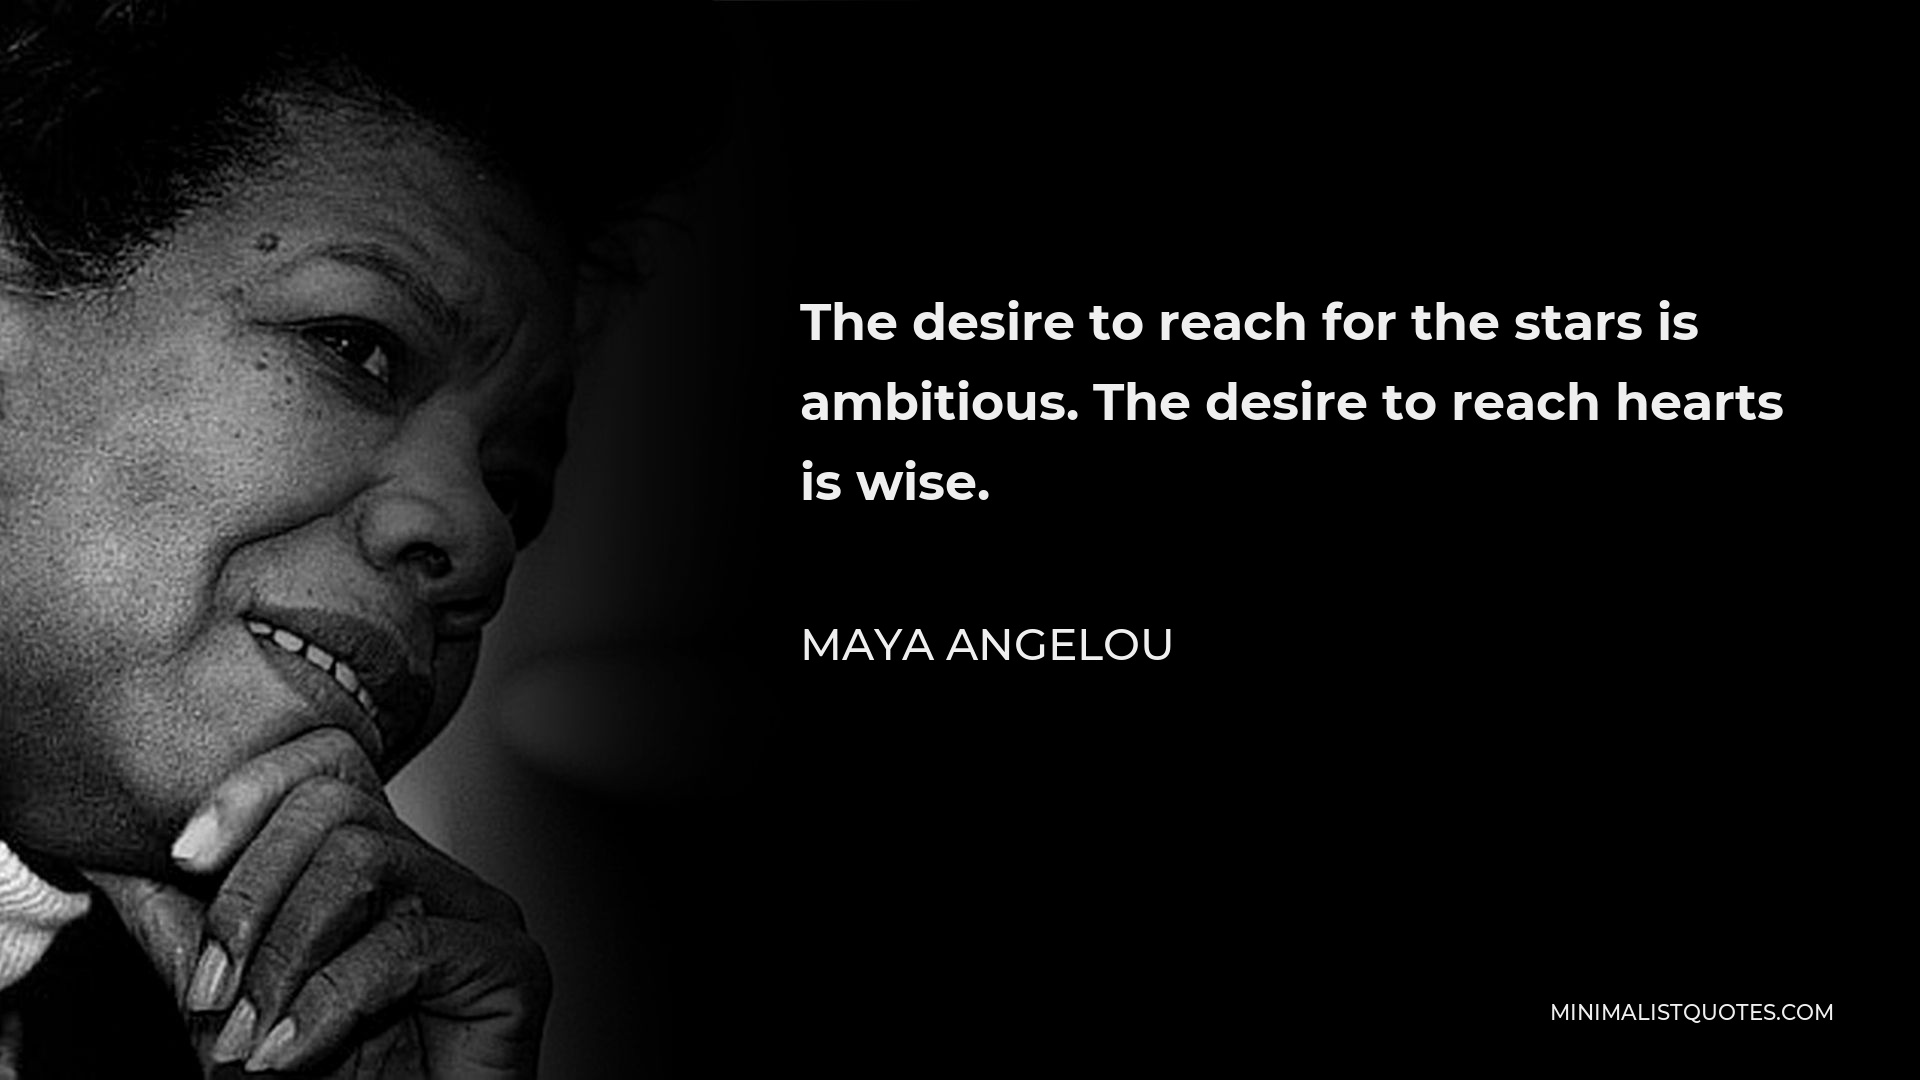 Maya Angelou Quote - The desire to reach for the stars is ambitious. The desire to reach hearts is wise.